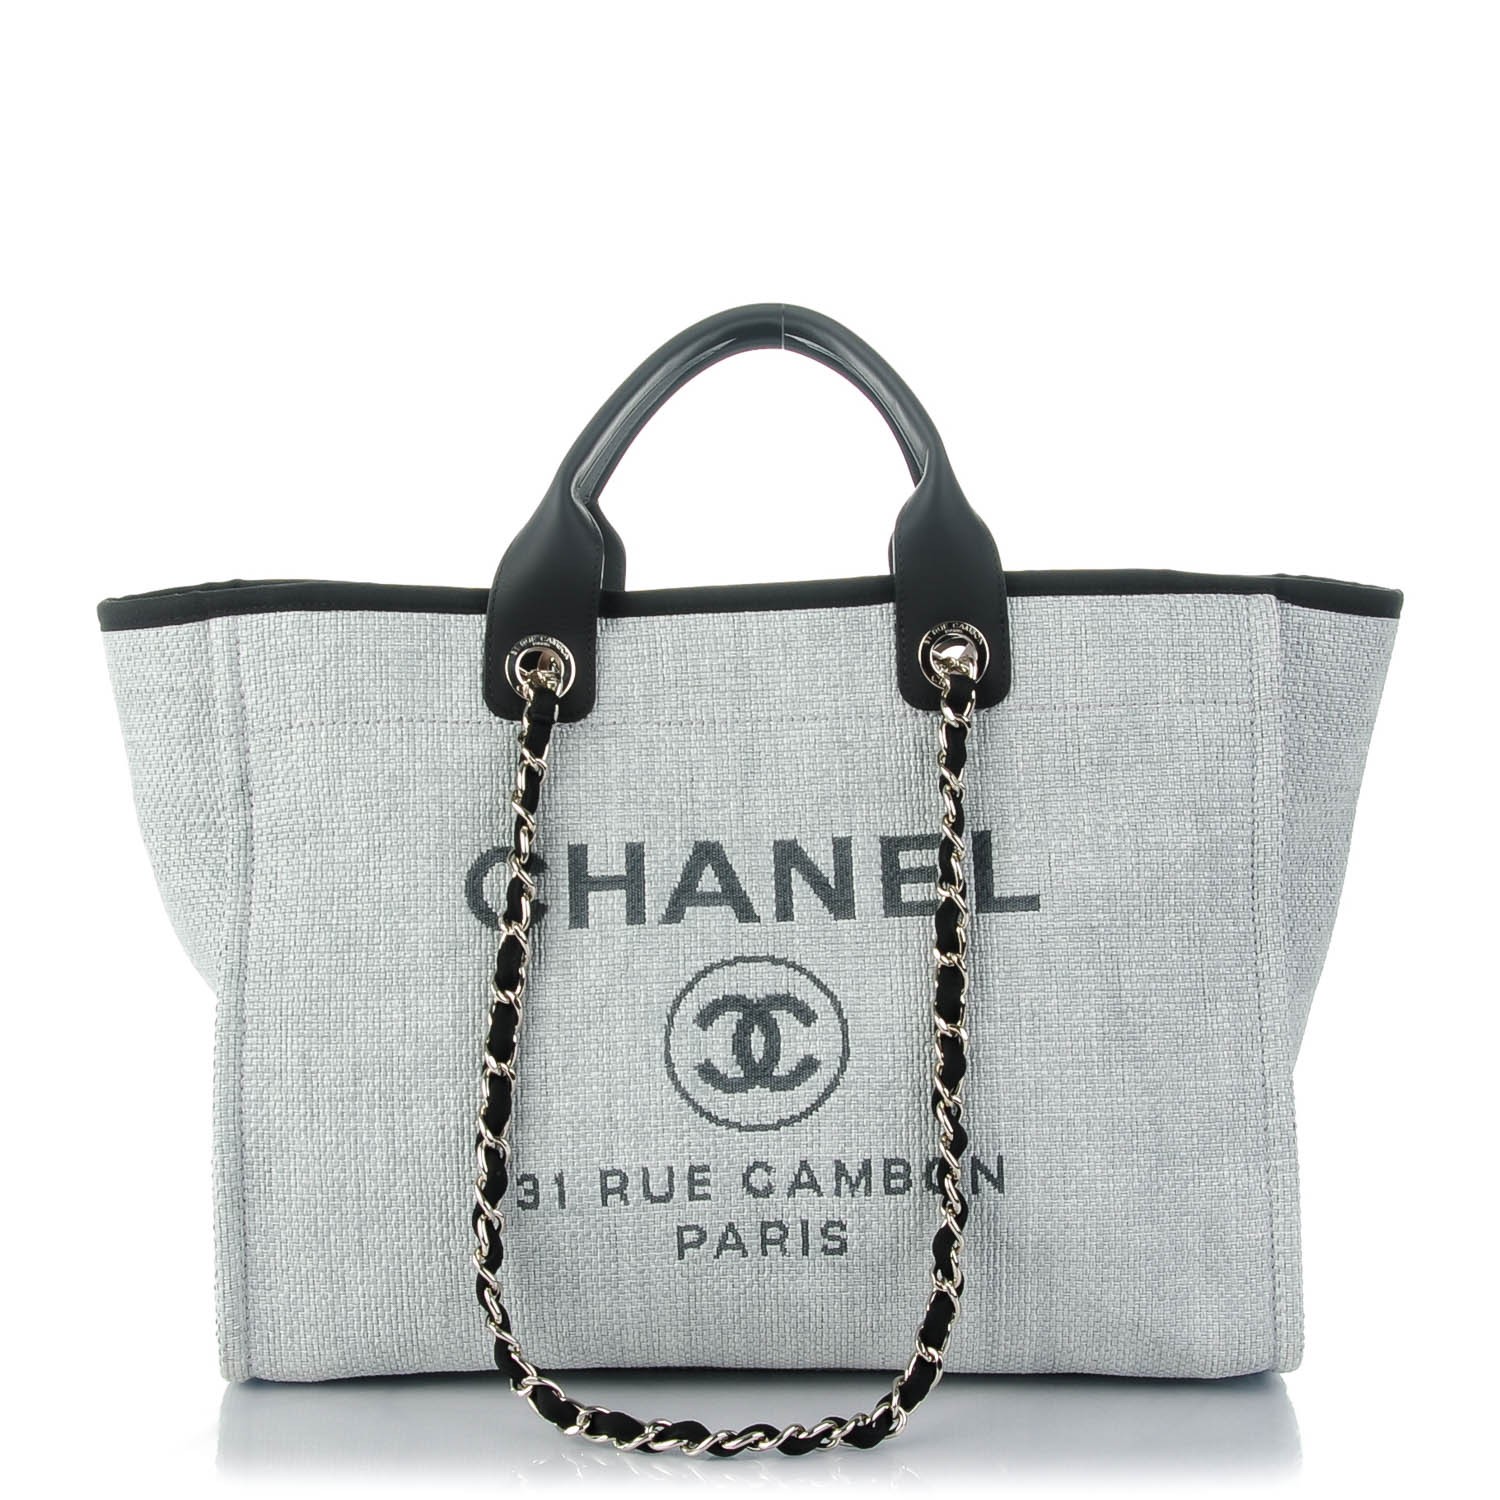 CHANEL Canvas Deauville Large Tote Grey 134176